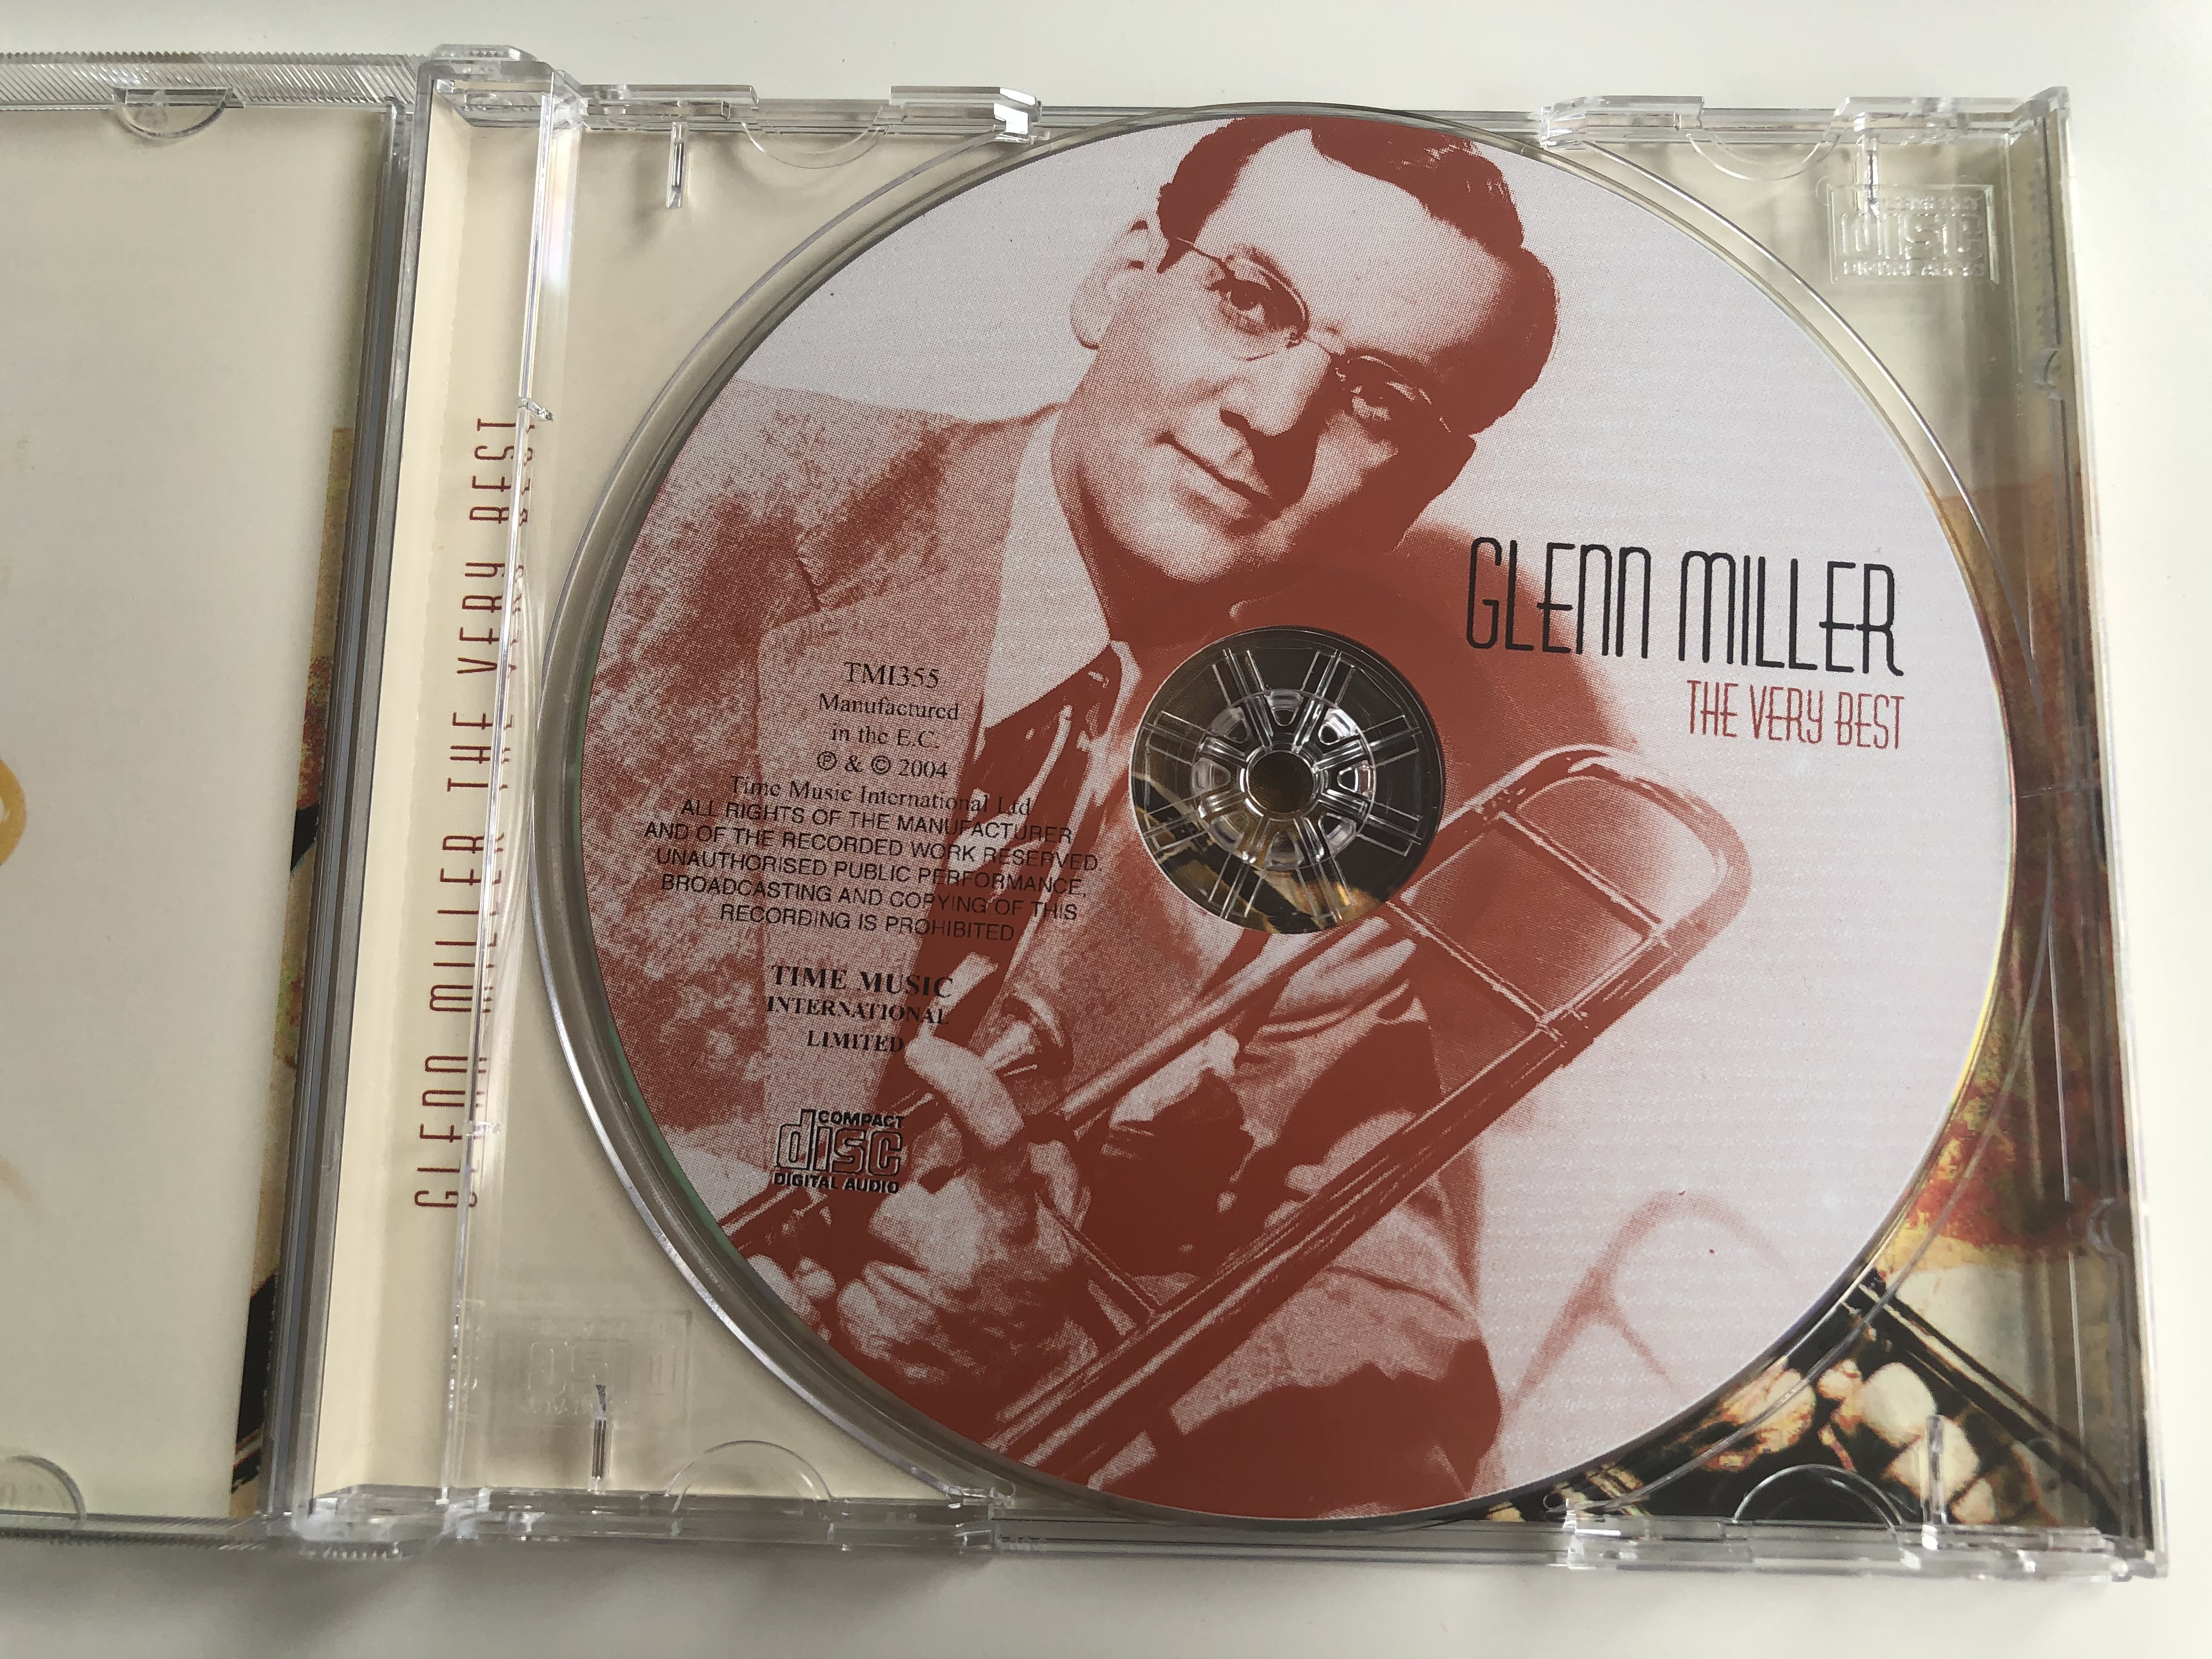 glenn-miller-the-very-best-of-in-the-mood-pennsylvania-6-5000-little-brown-jug-tuxedo-junction-and-many-more-time-is-international-limited-audio-cd-2004-tmi355-3-.jpg